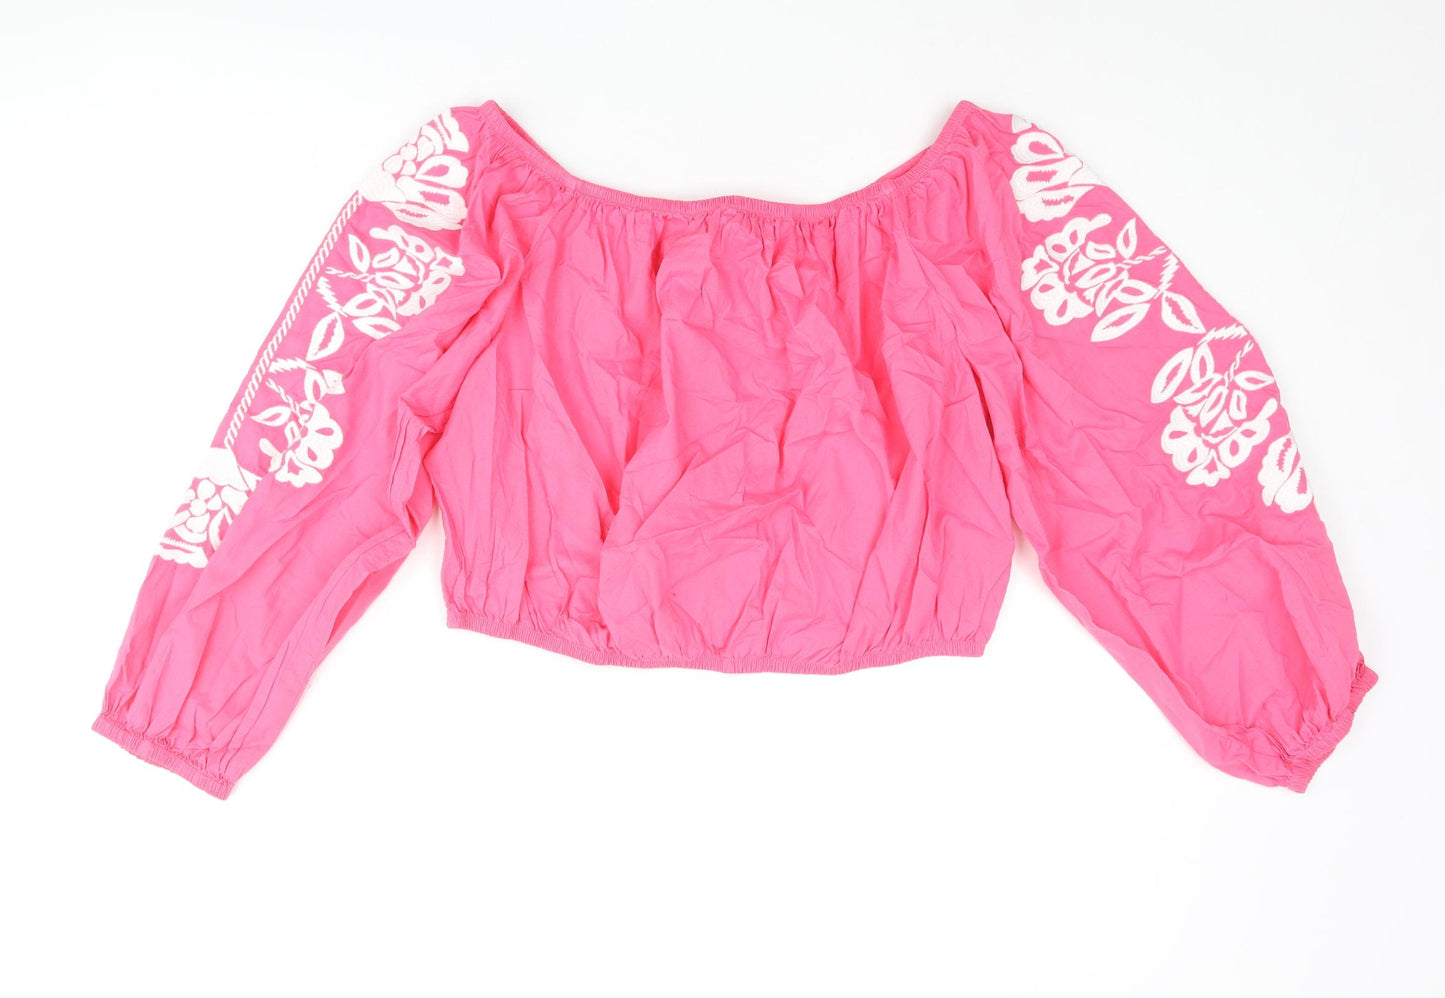 Marks and Spencer Womens Pink Cotton Cropped Blouse Size 18 Off the Shoulder - Floral Embroidery